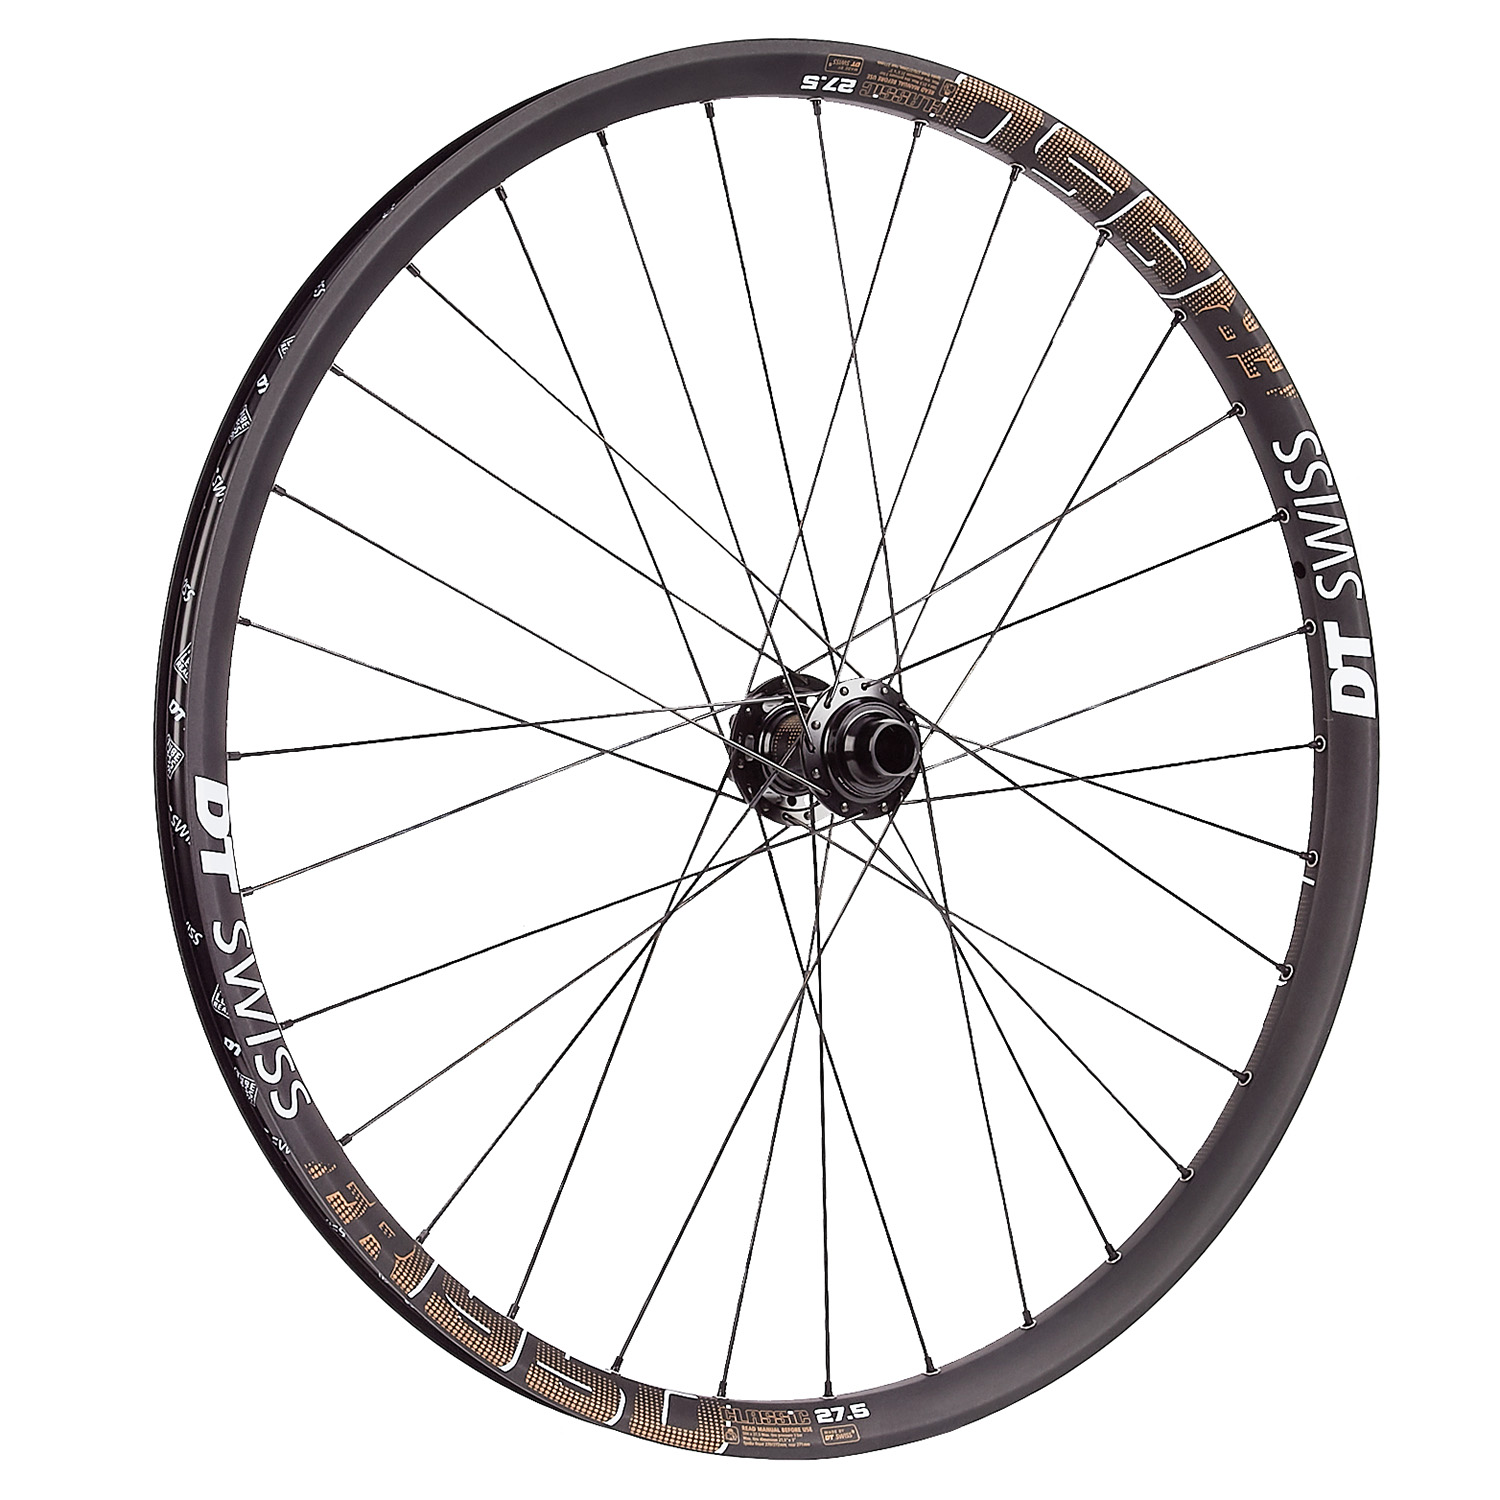 DT Swiss Ruota FR 1950 Classic Anteriore, 27.5 Pollici, 110x20 mm, Tubeless Ready